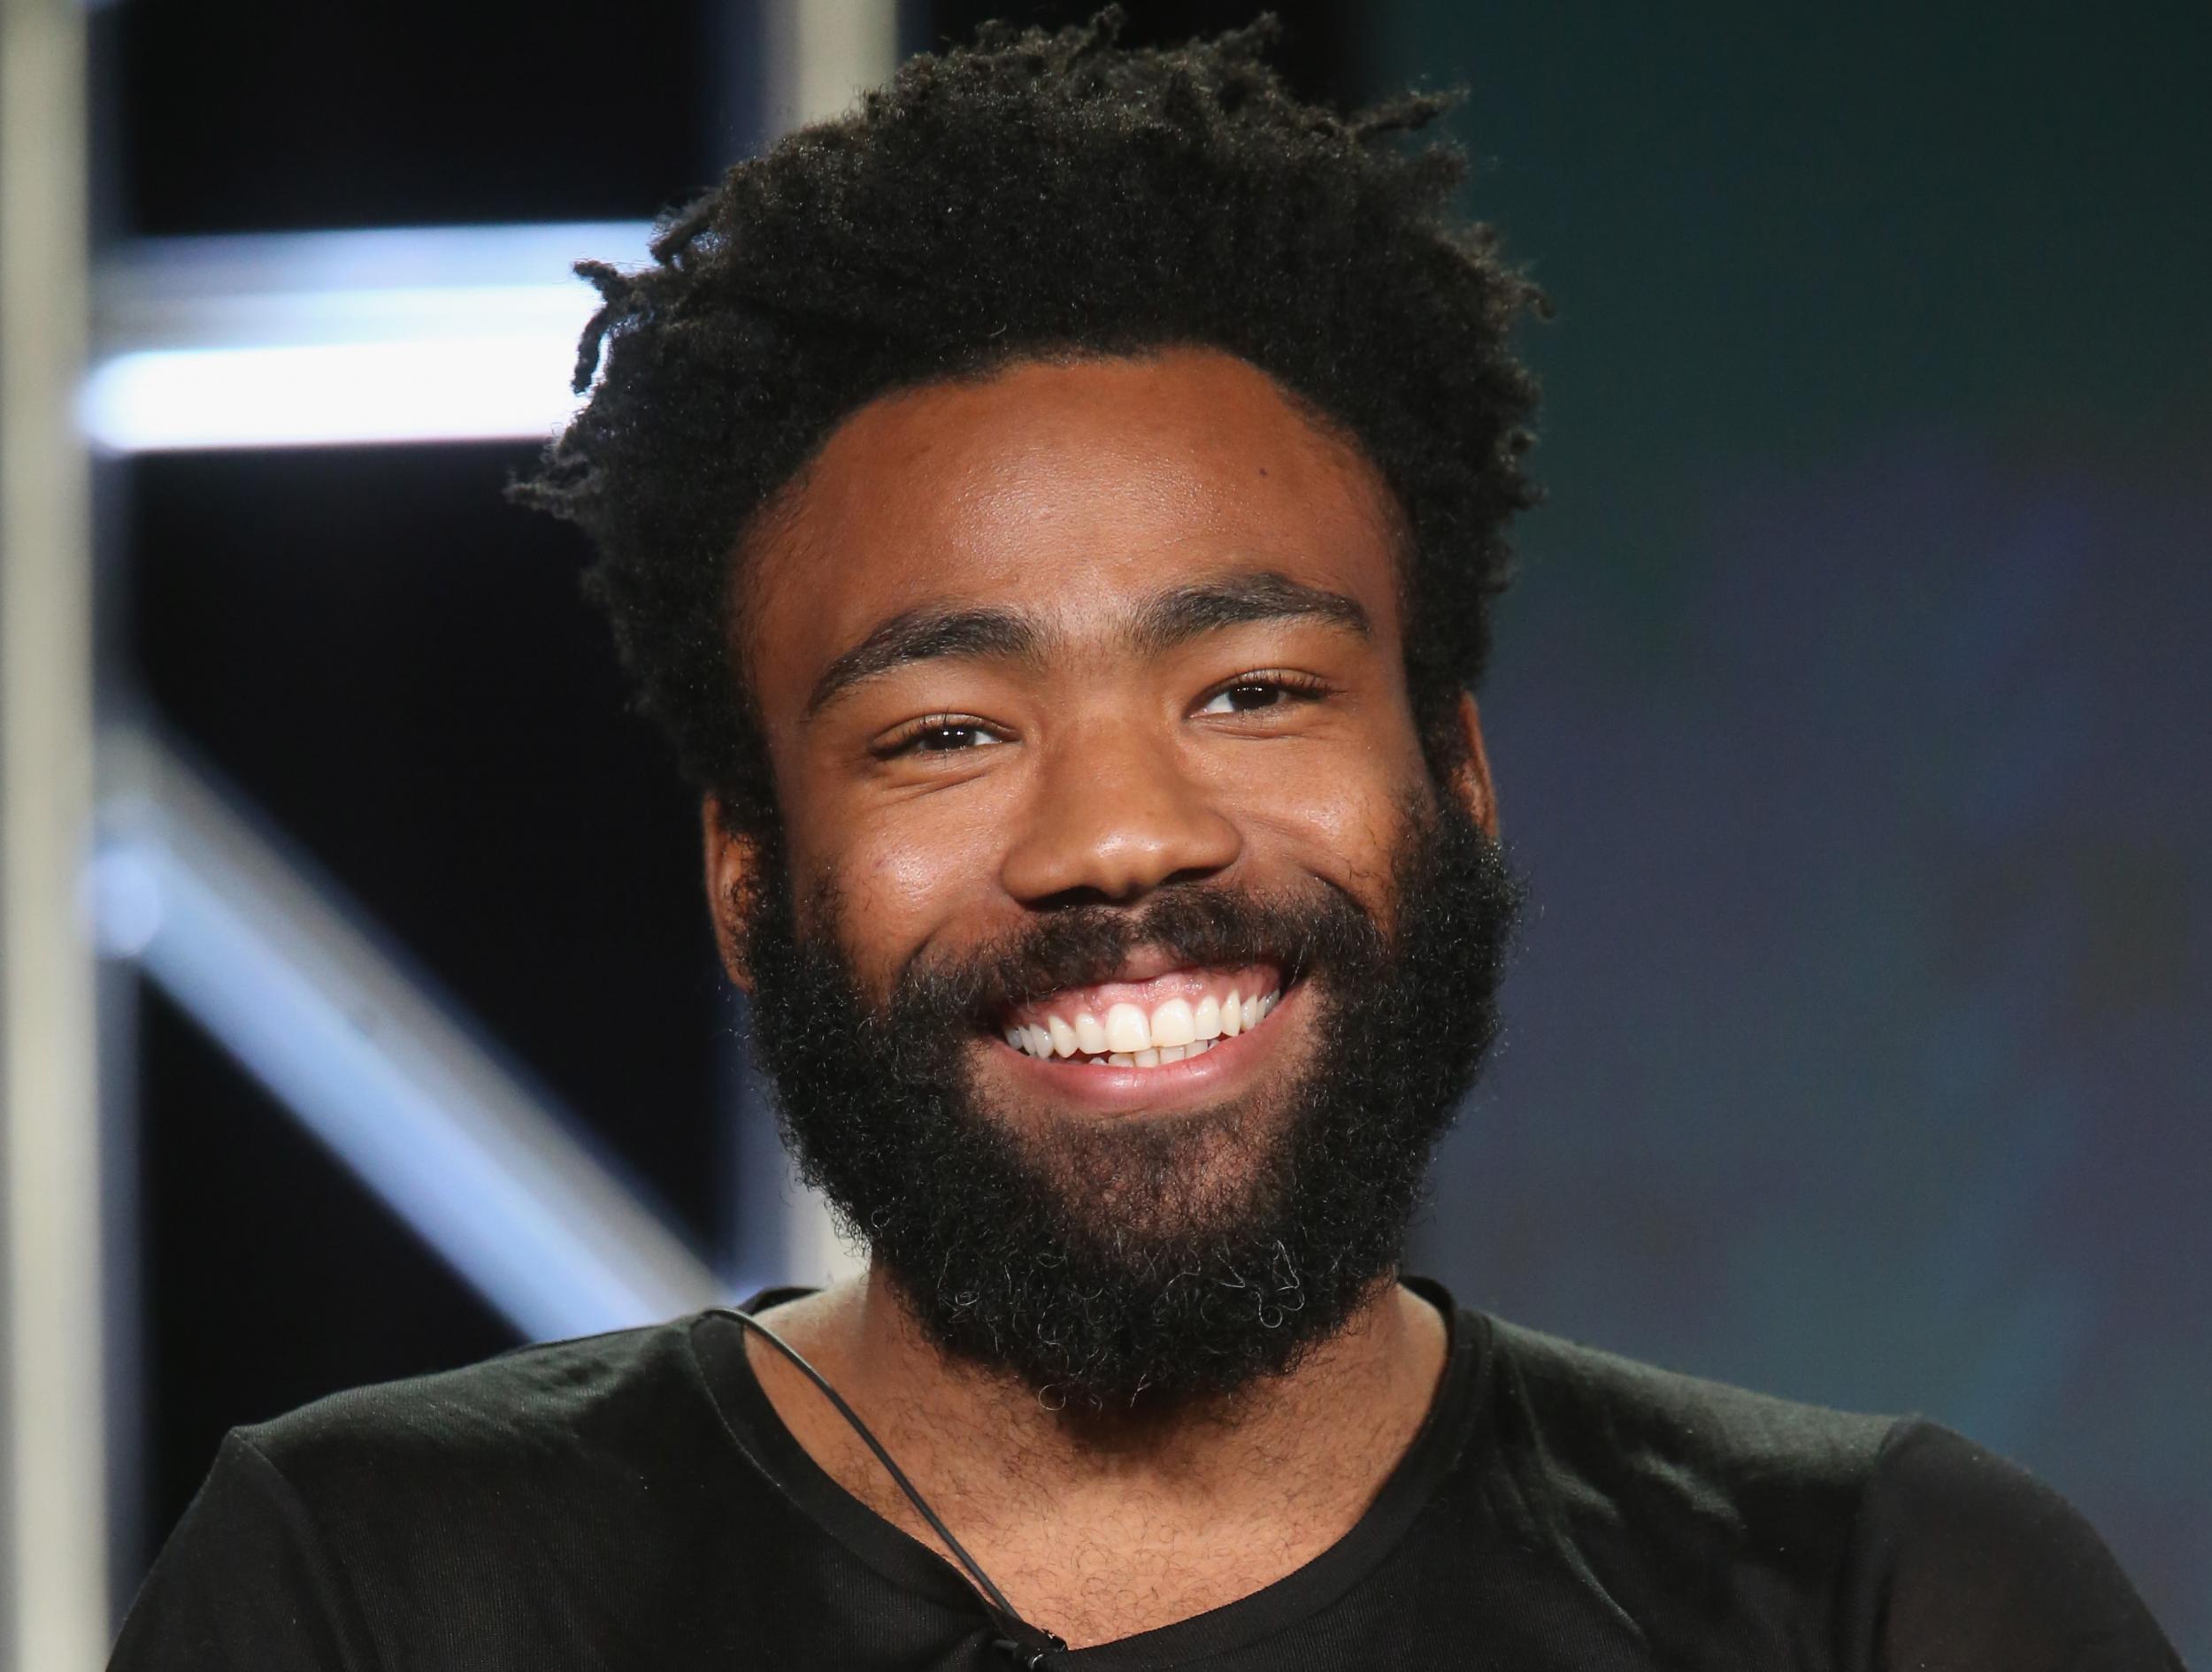 Donald Glover at the 2016 Winter TCA Tour.